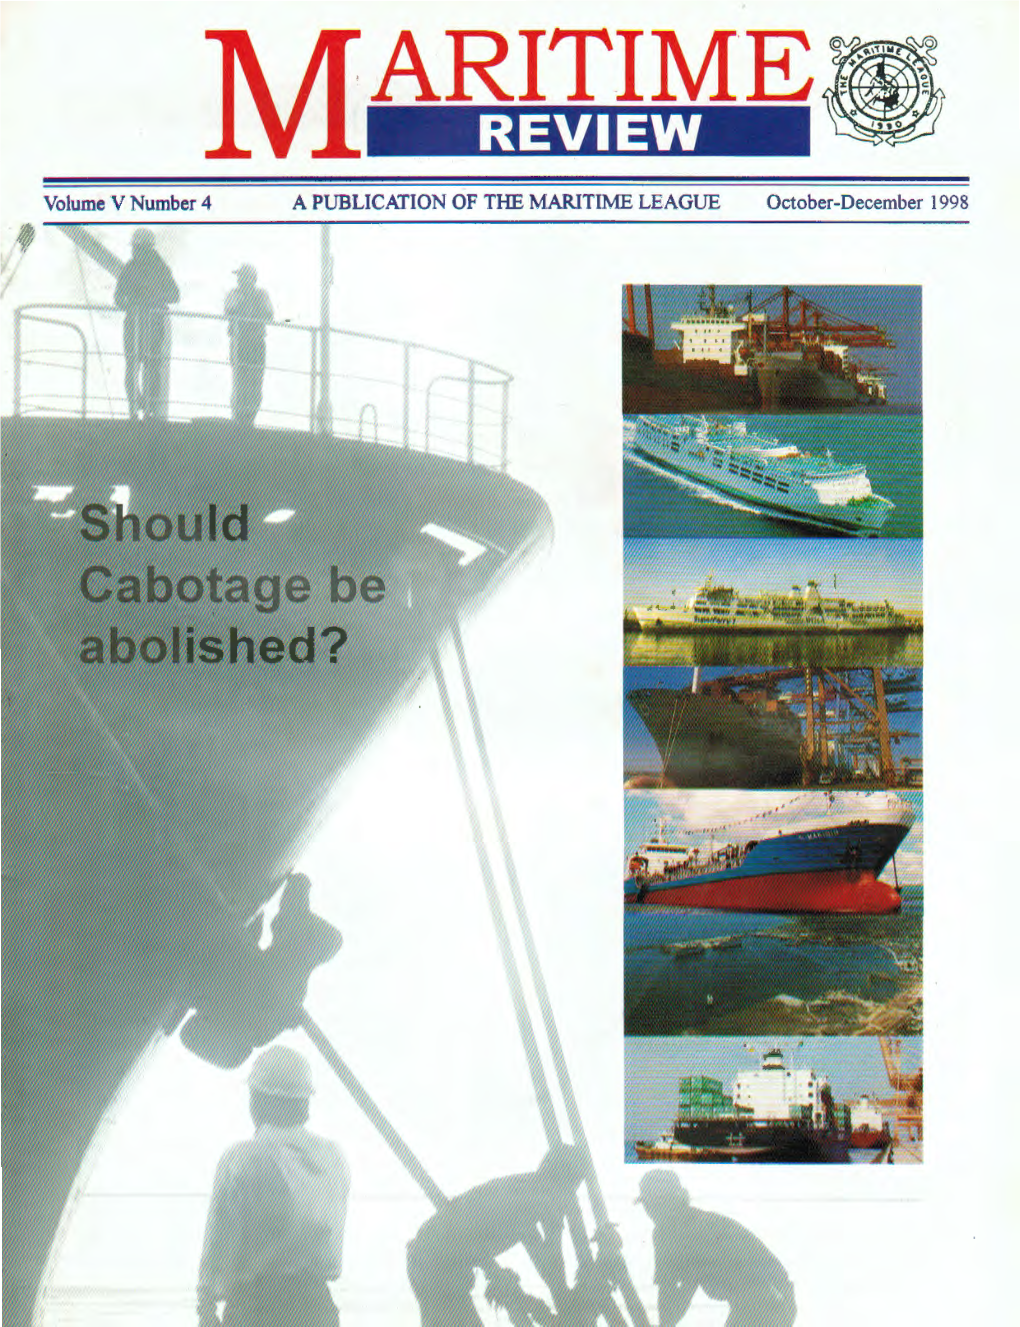 The Maritime Review